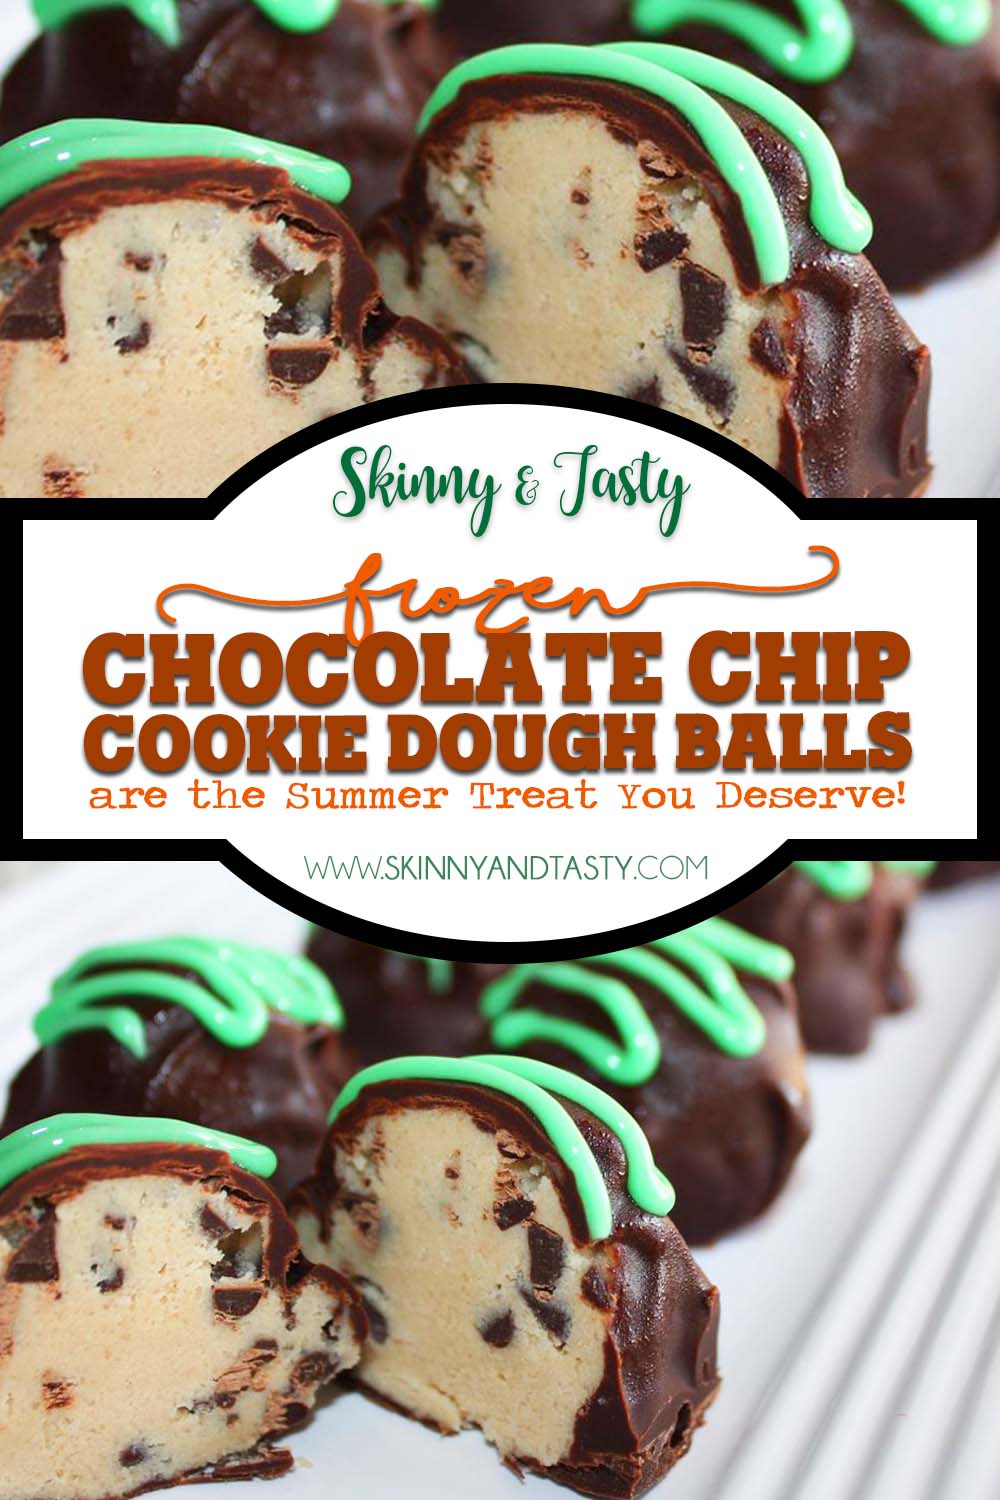 Frozen Chocolate Chip Cookie Dough Balls Are The Summer Treat You Deserve